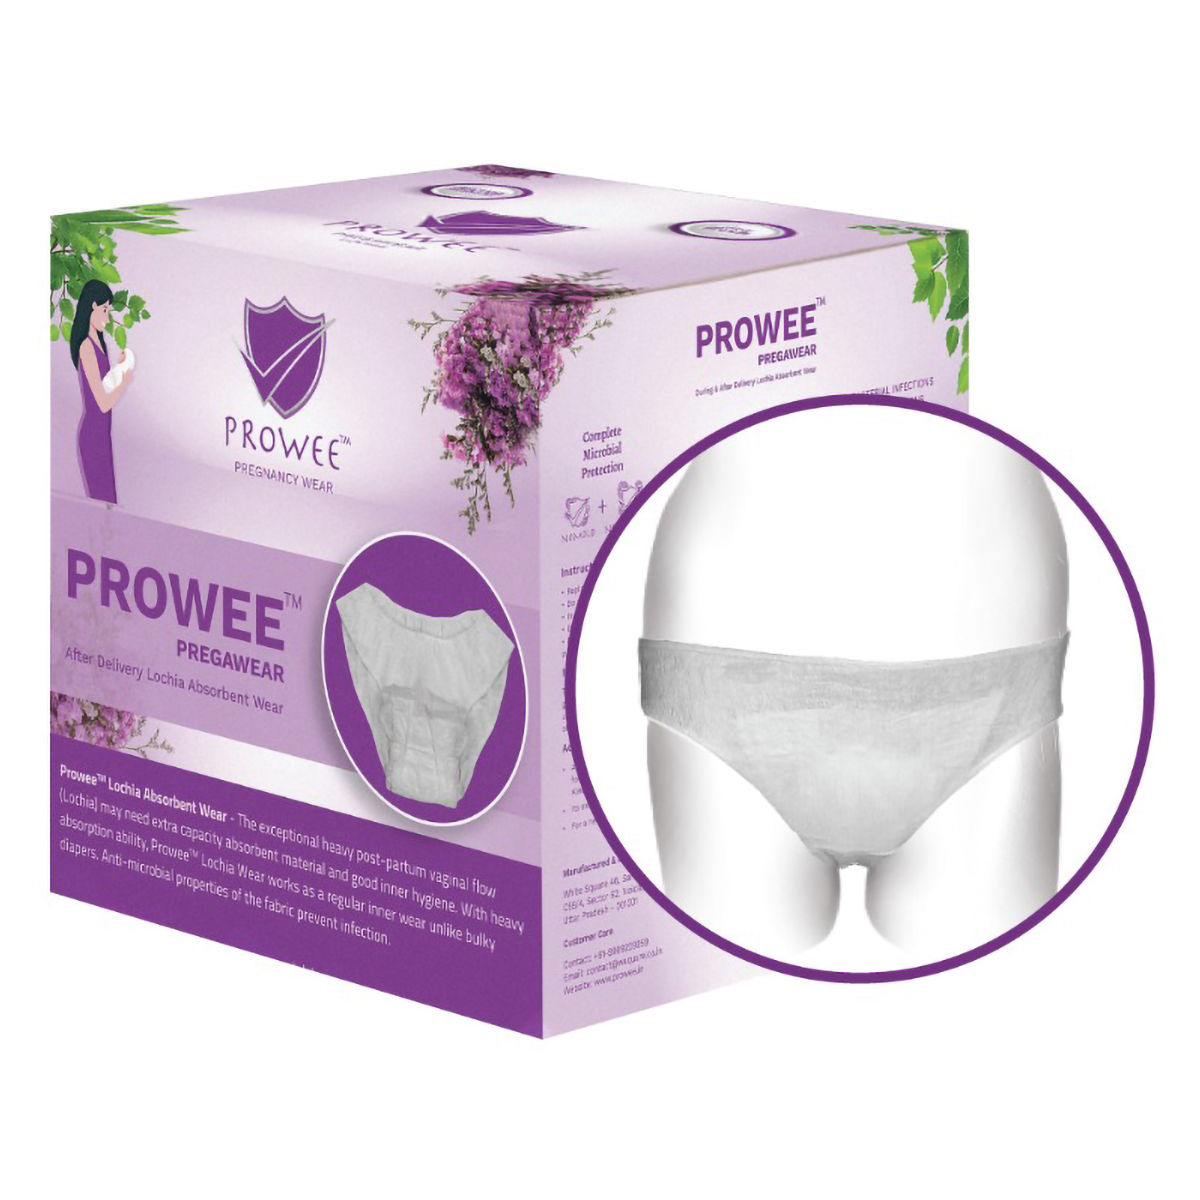 Prowee Pregawear After Delivery Lochia Absorbent Wear Panty XXL, 5 Count  Price, Uses, Side Effects, Composition - Apollo Pharmacy